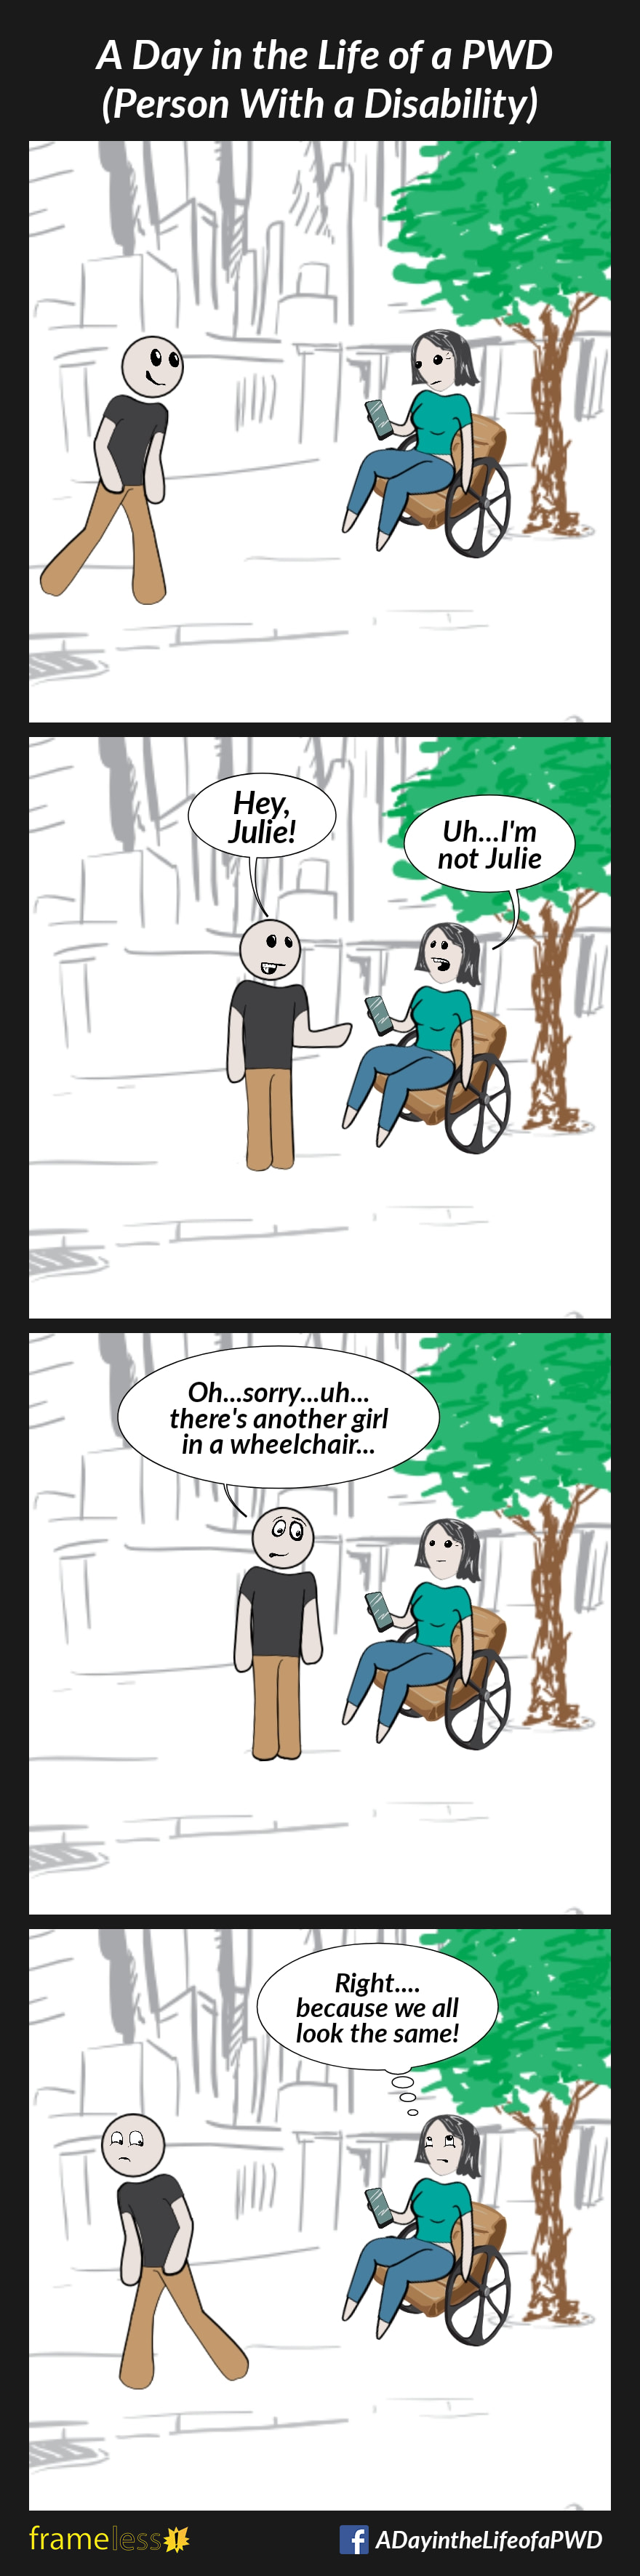 COMIC STRIP 
A Day in the Life of a PWD (Person With a Disability) 

Frame 1:
A woman in a wheelchair is sitting under a tree, looking at her phone.
A smiling man approaches her.

Frame 2:
MAN: Hey, Julie!
WOMAN: Uh...I'm not Julie

Frame 3:
MAN: Oh...sorry...uh...there's another girl in a wheelchair...

Frame 4:
The man walks away, embarrassed. 
WOMAN (rolling her eyes and thinking): Right...because we all look the same!